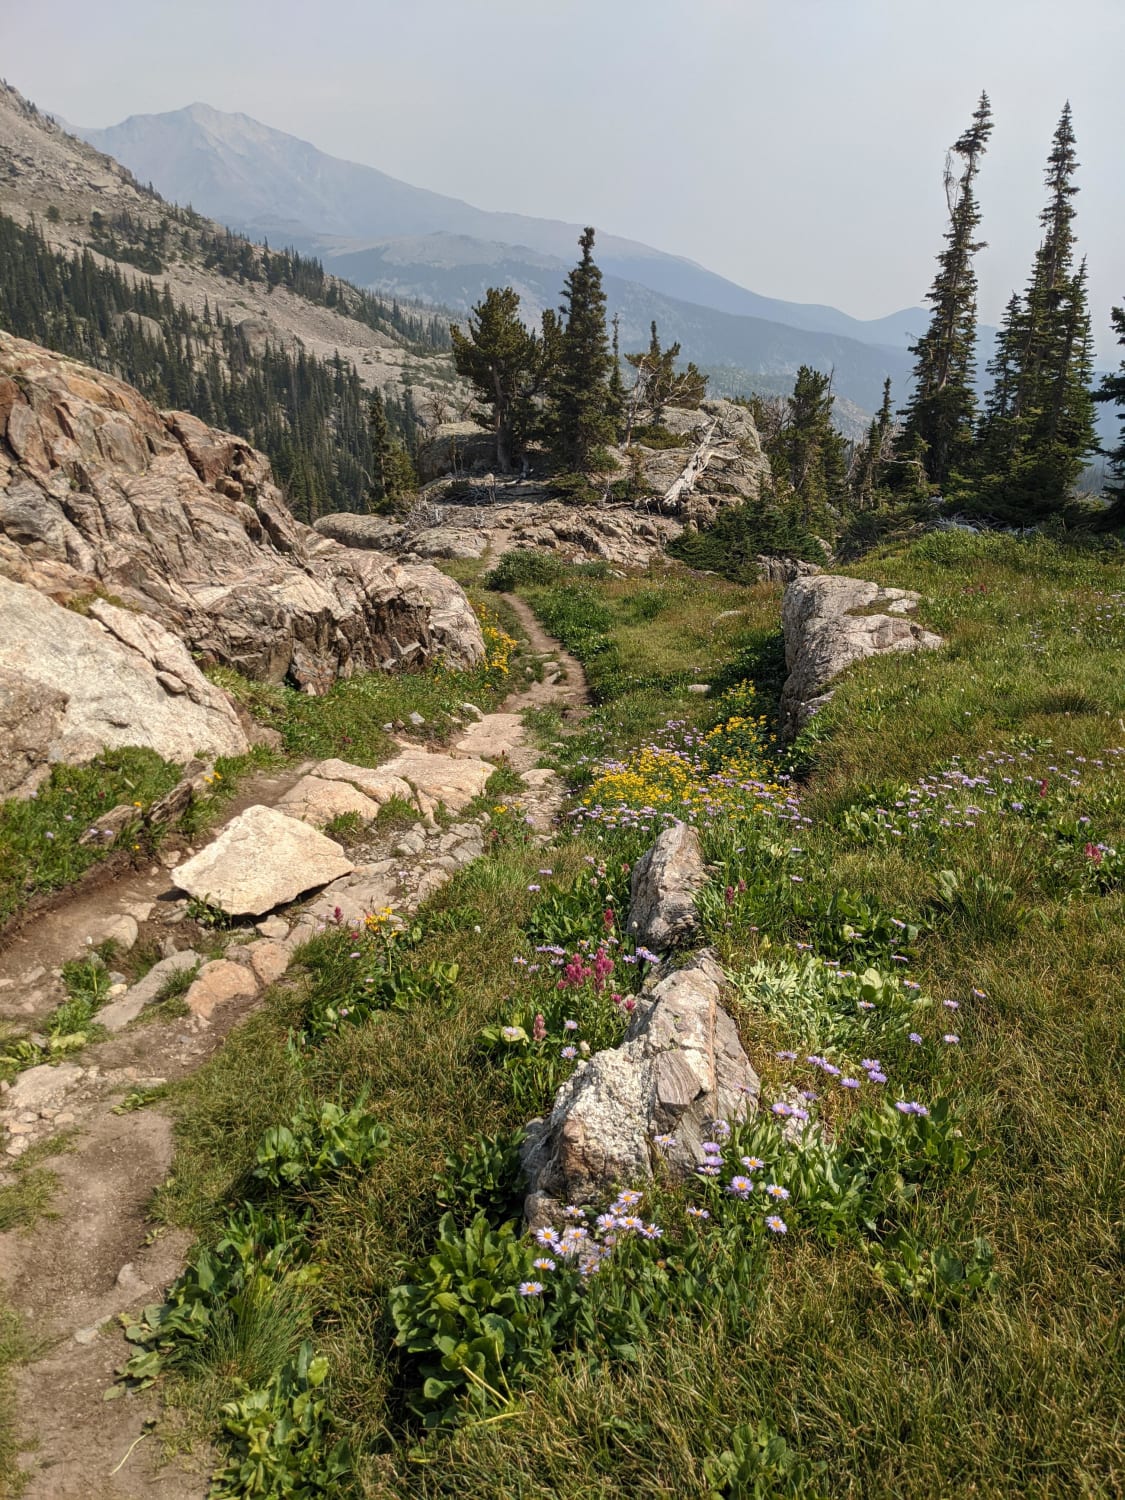 Wildflowers on the Bluebird Lake Trail in Rocky Mountain National Park, Colorado, USA. (Aug 23, 2020)